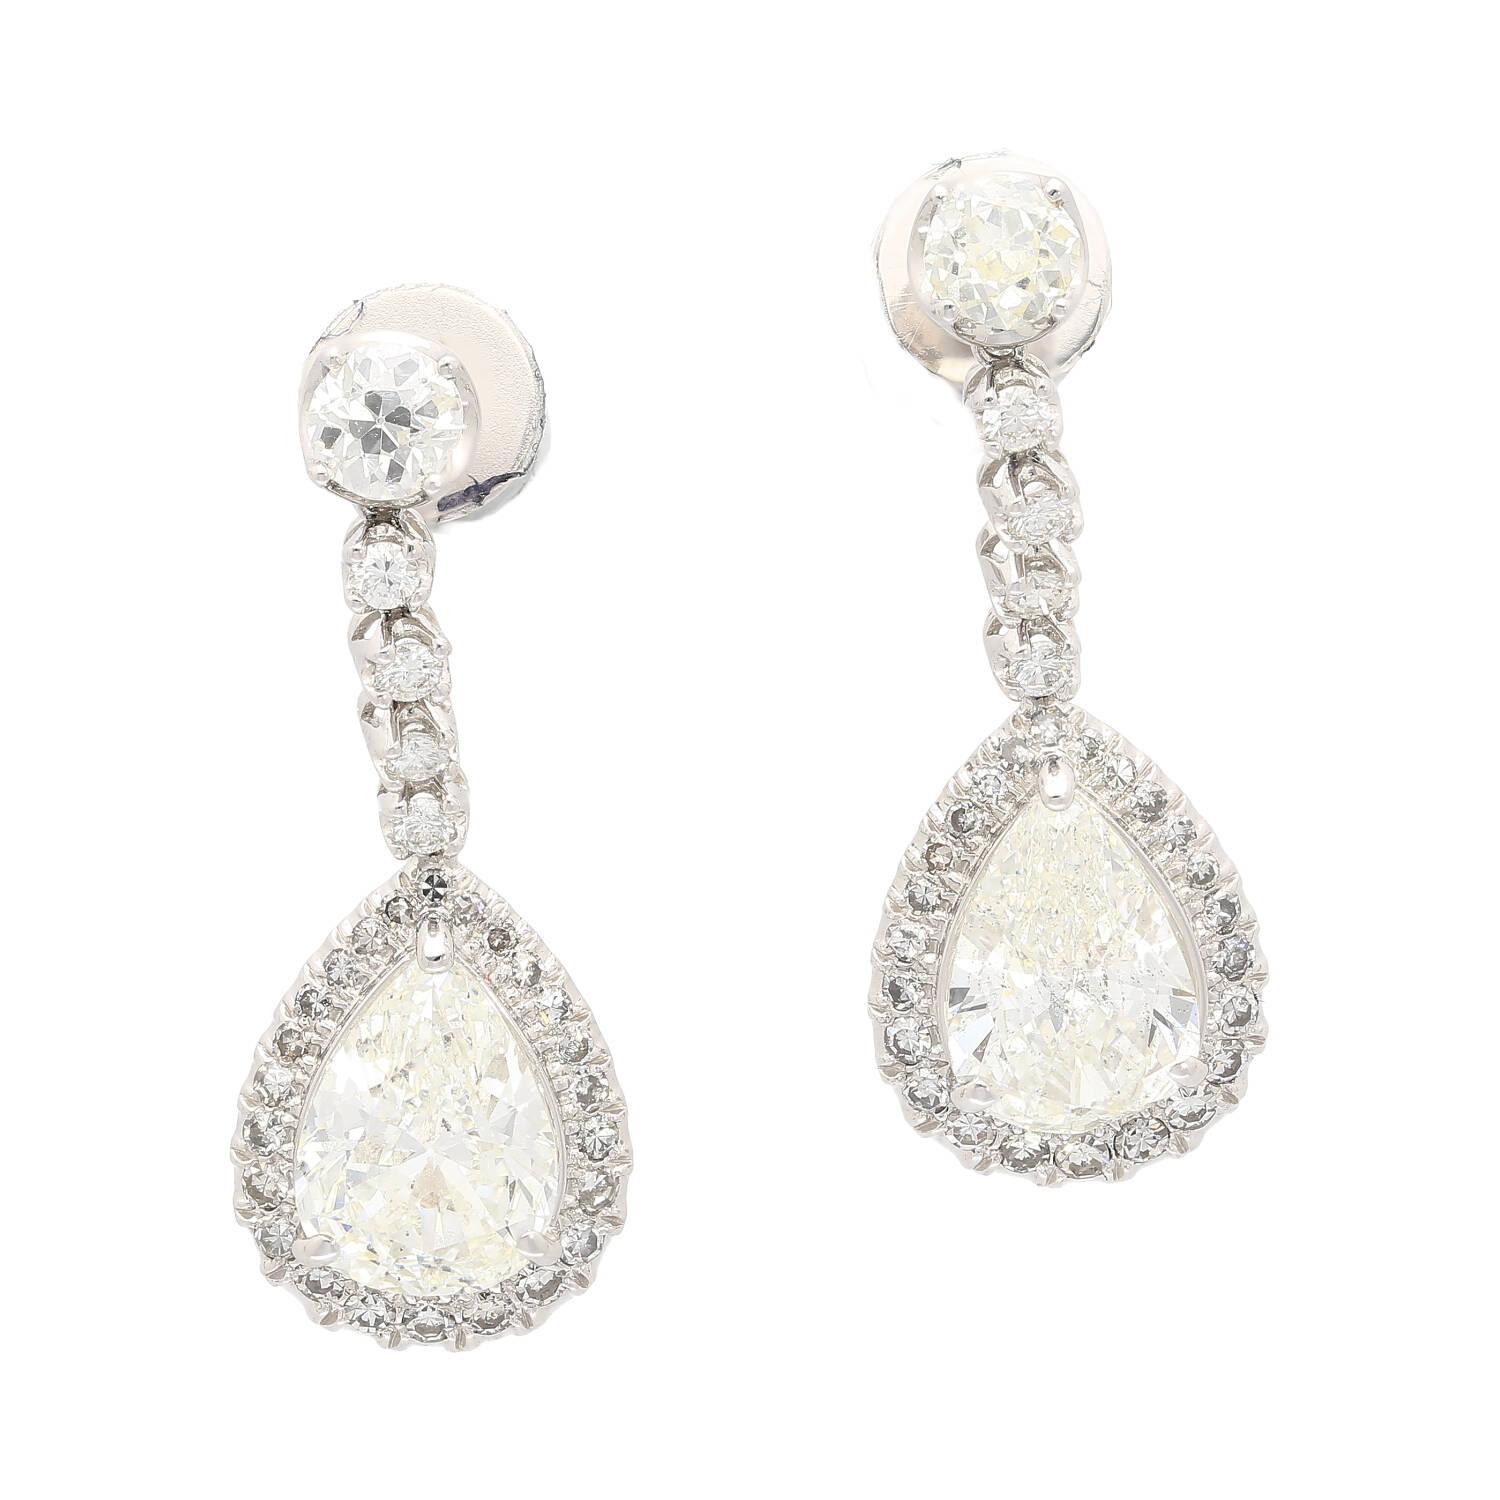 Adorn yourself with these luxurious drop earrings crafted from 18K white gold. The contemporary design and prong setting gives the elegantly shimmering natural diamonds of 7.51 carats a beautiful and radiant presence, weighing in at 7.72 grams and